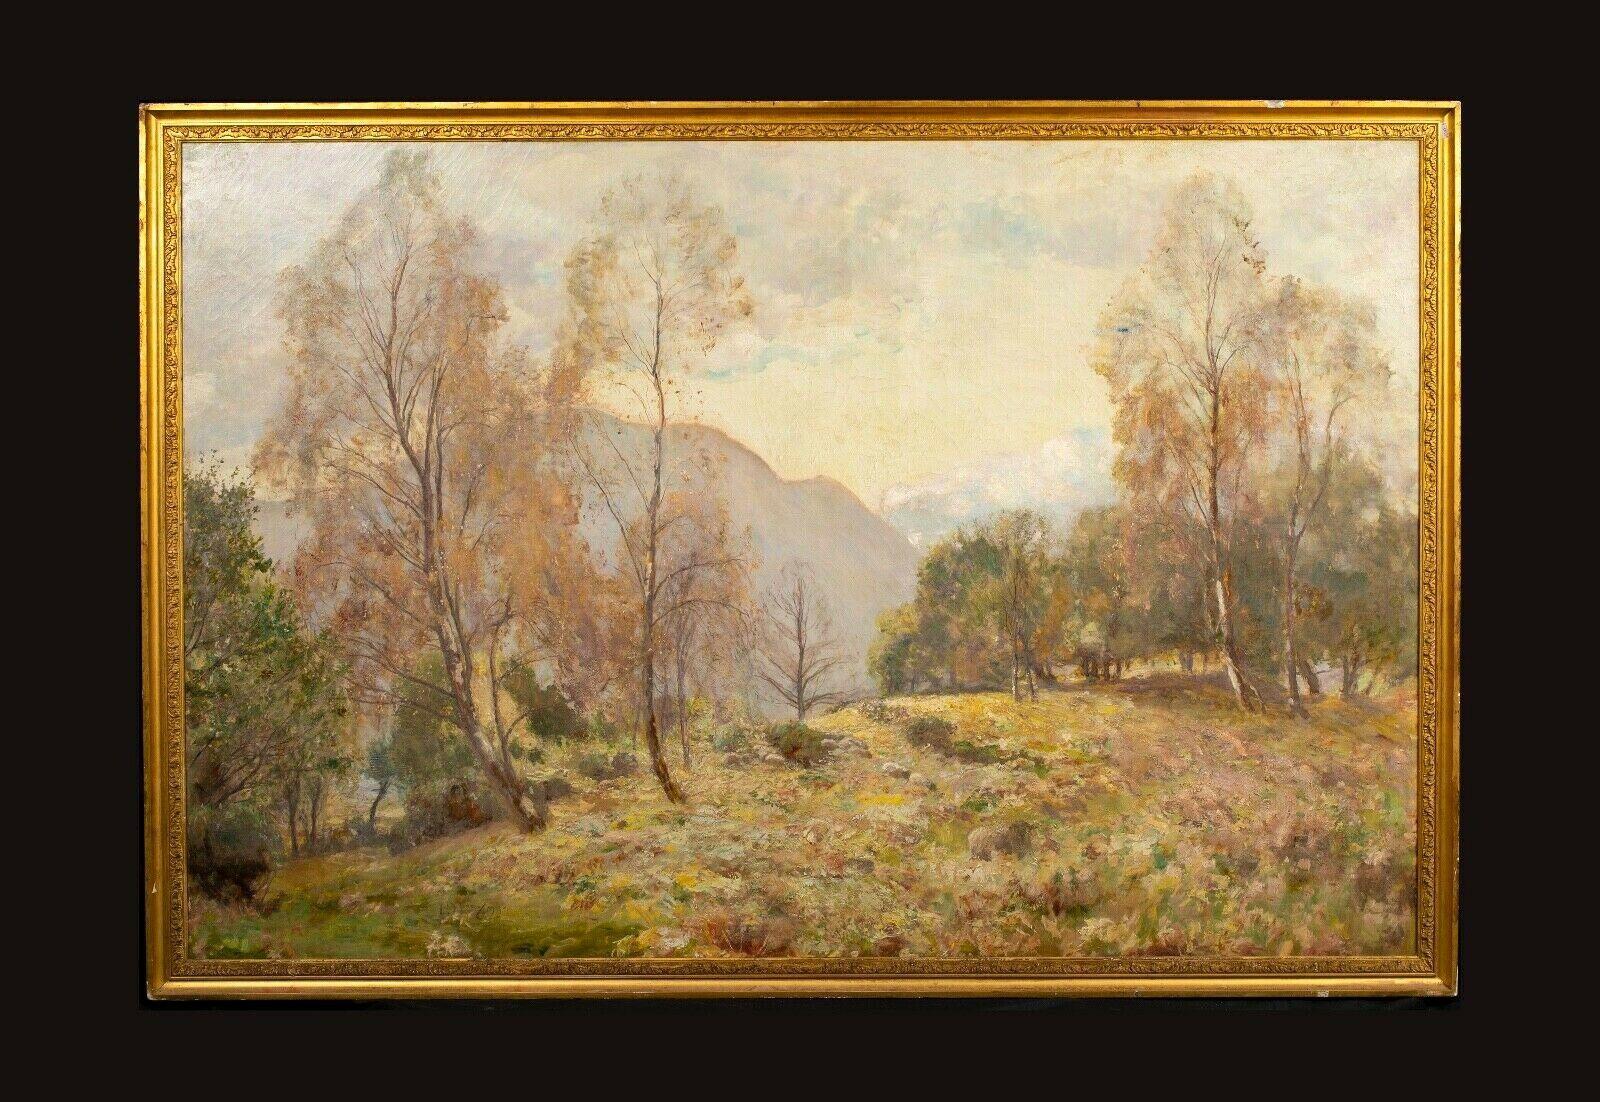 No. 4 The Birk And The Bracken, dated 1913 - Painting by Sir David Murray